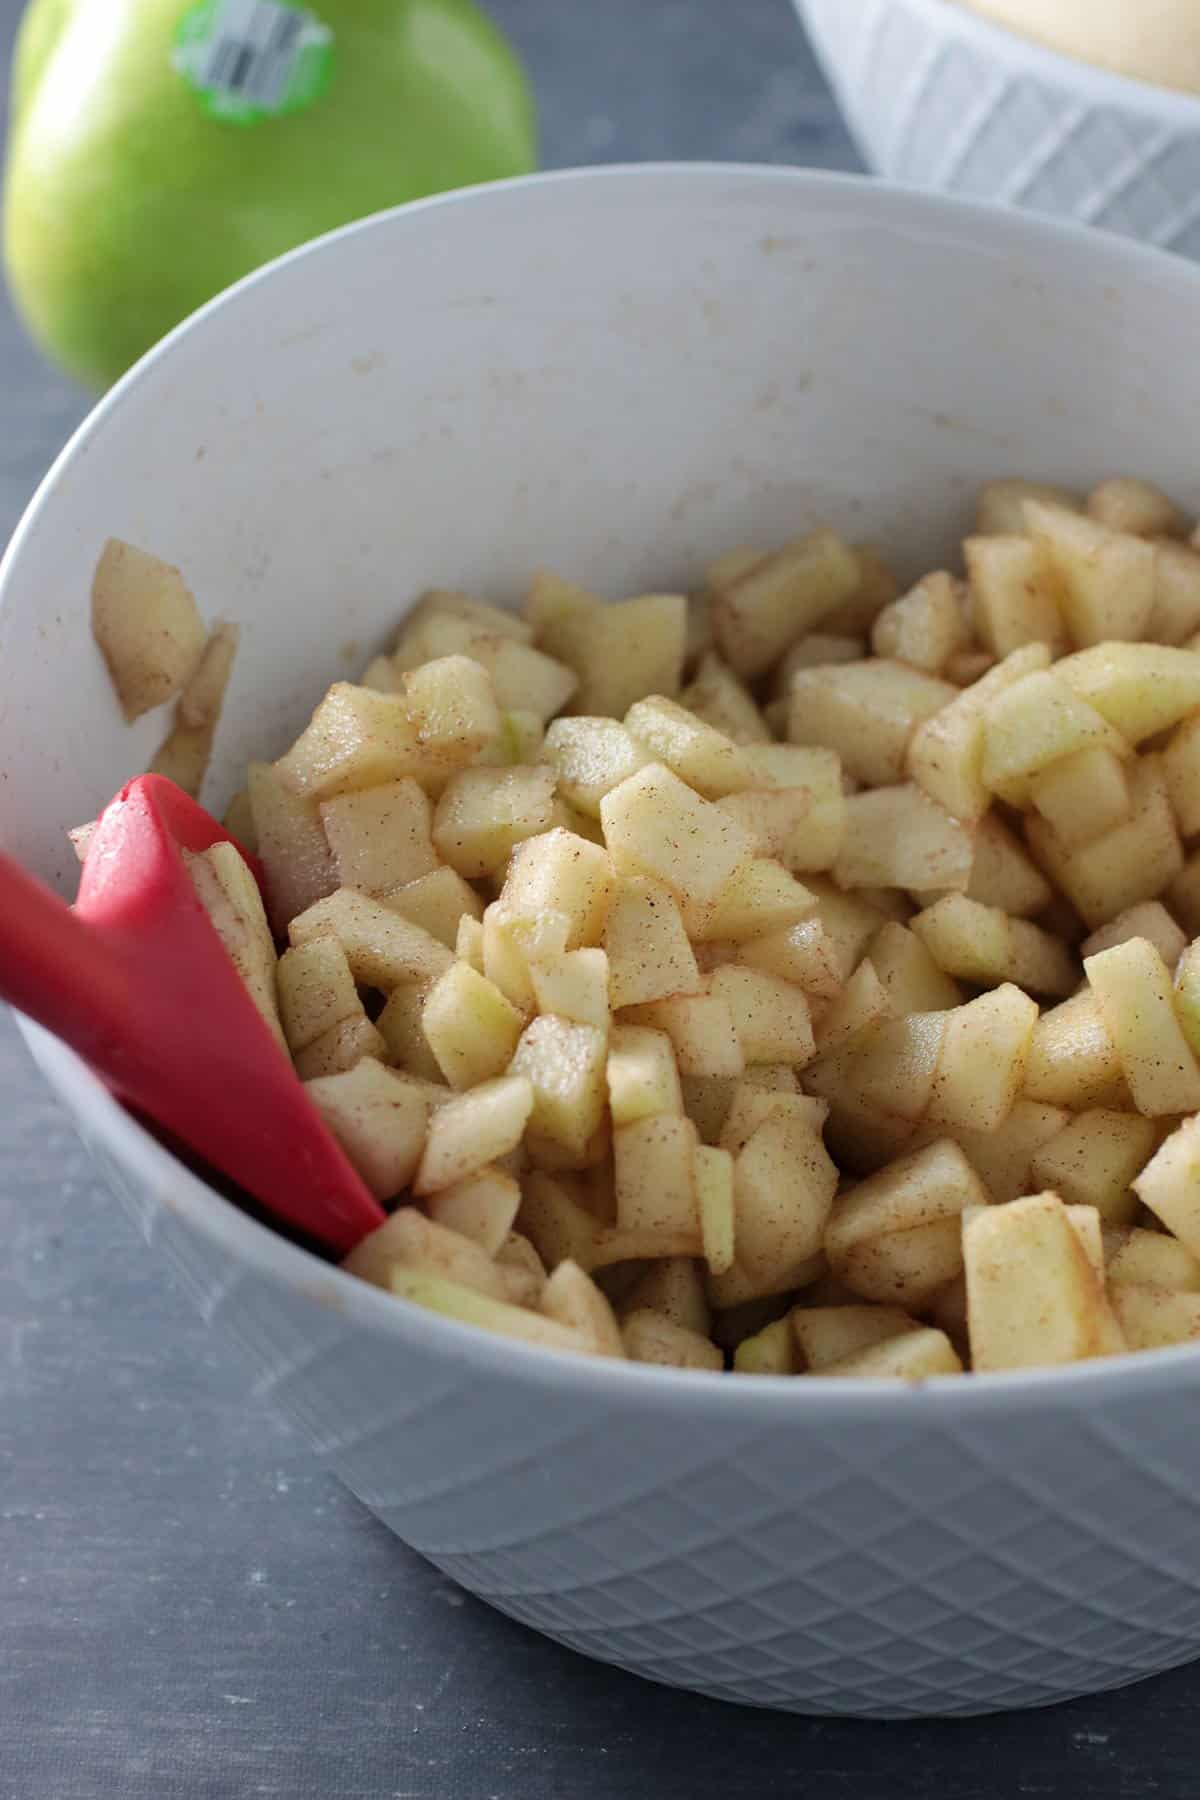 The diced apple filling for Apple Challah.